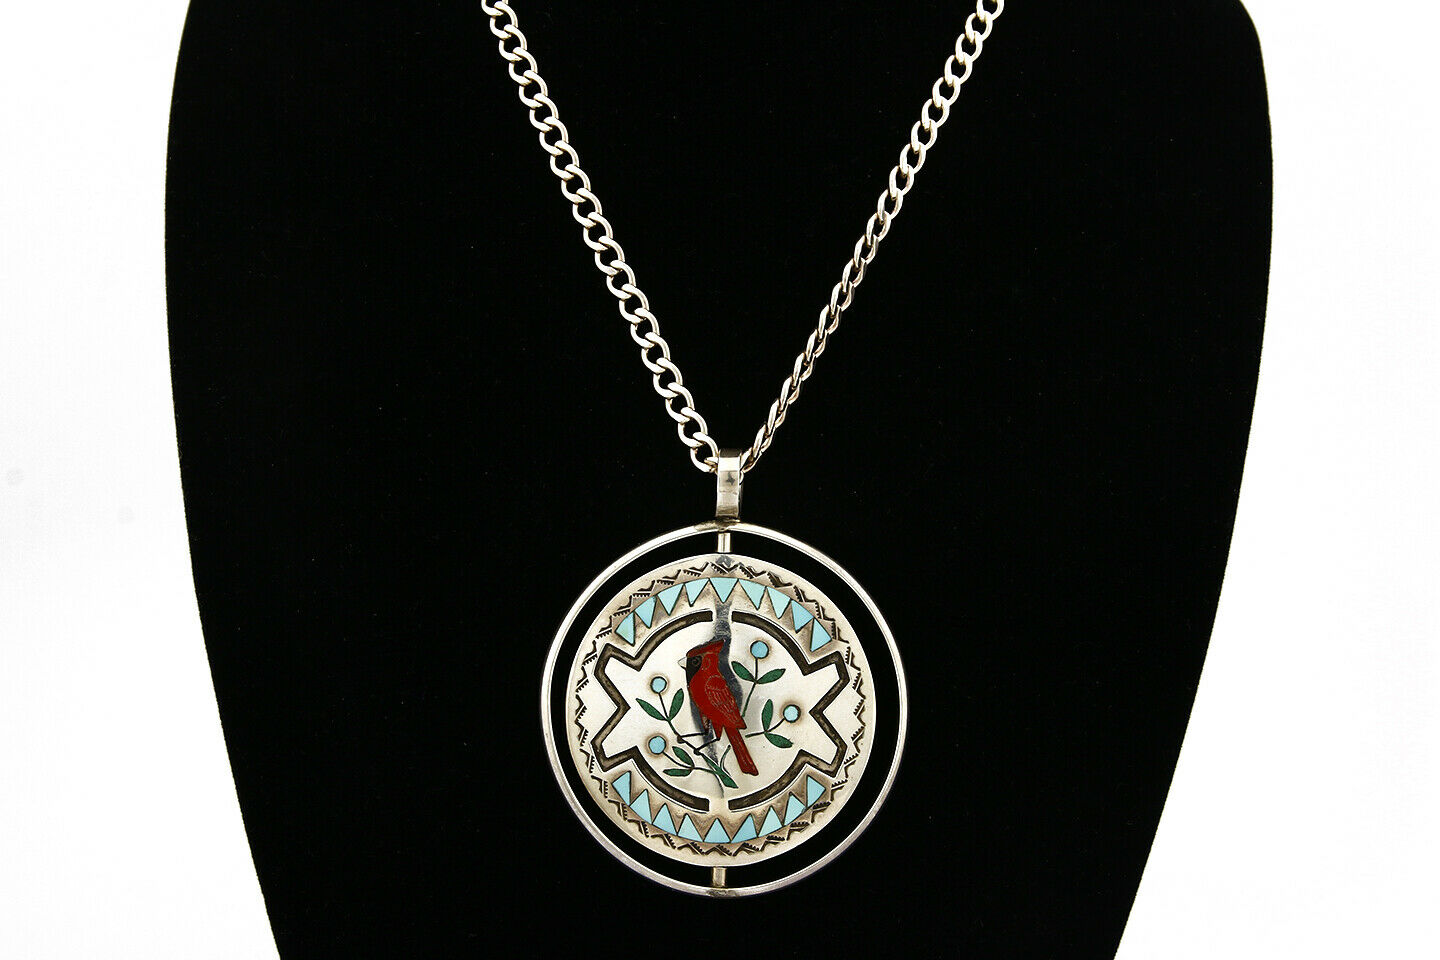 Zuni Bird Spinner Necklace .925 Silver Inlaid Signed Ghahate